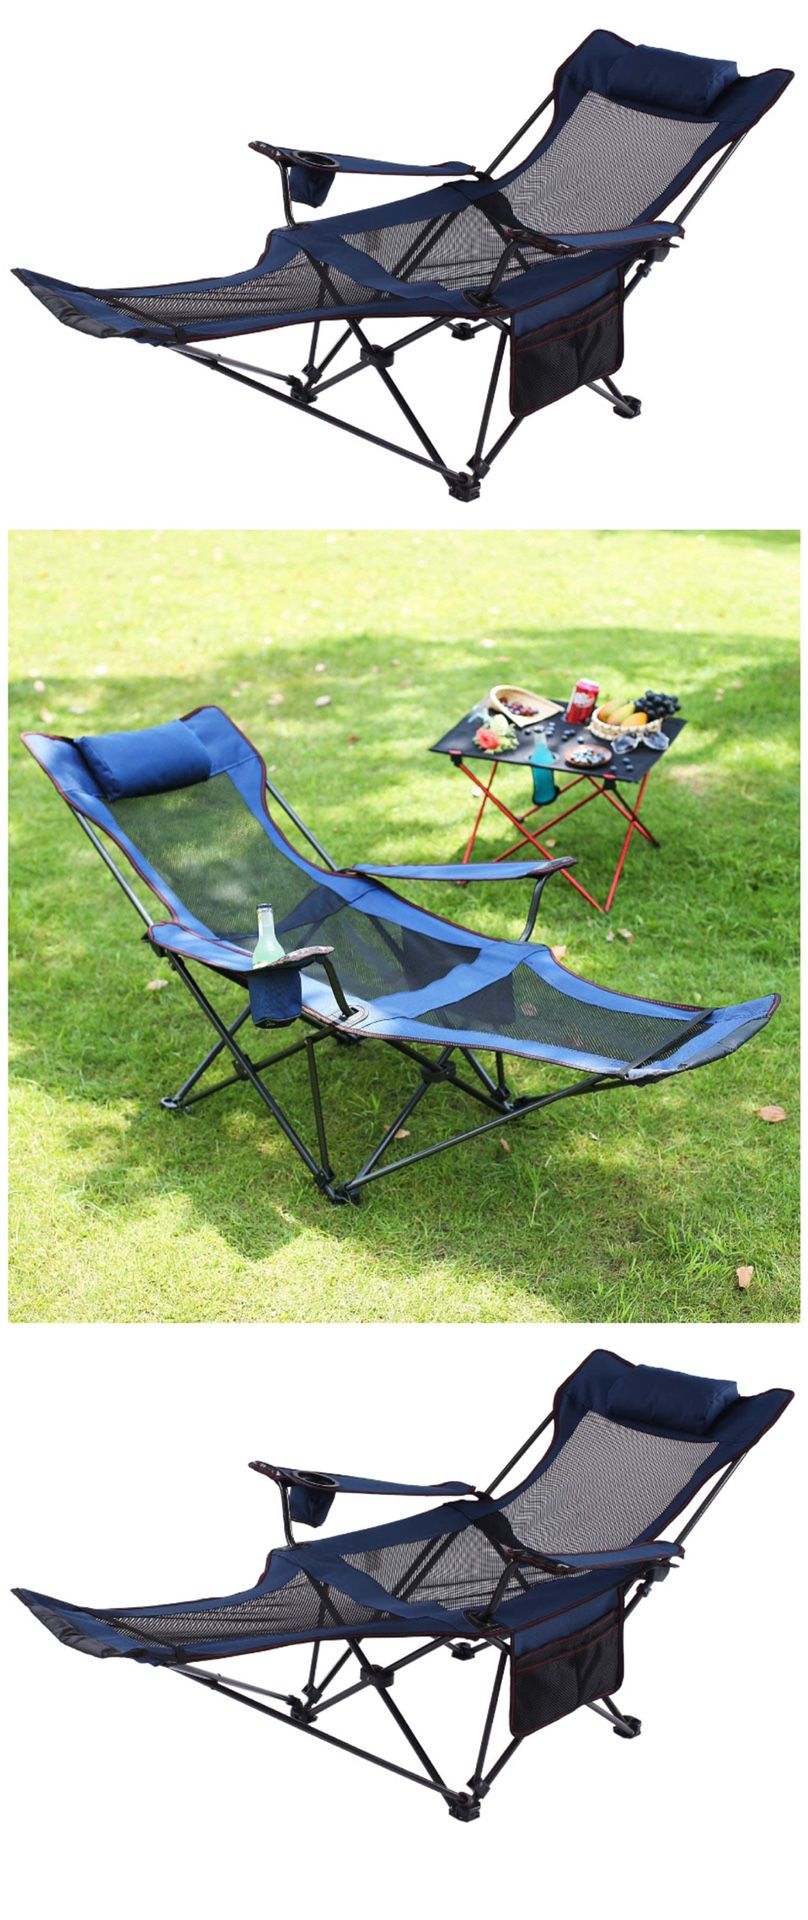 Camping Recliner and Lounge Chair, Backpacking Folding Chair with Headrest, Footrest and Storage Bag for Outdoor Camping, BBQ, 200lbs Weight Capacity